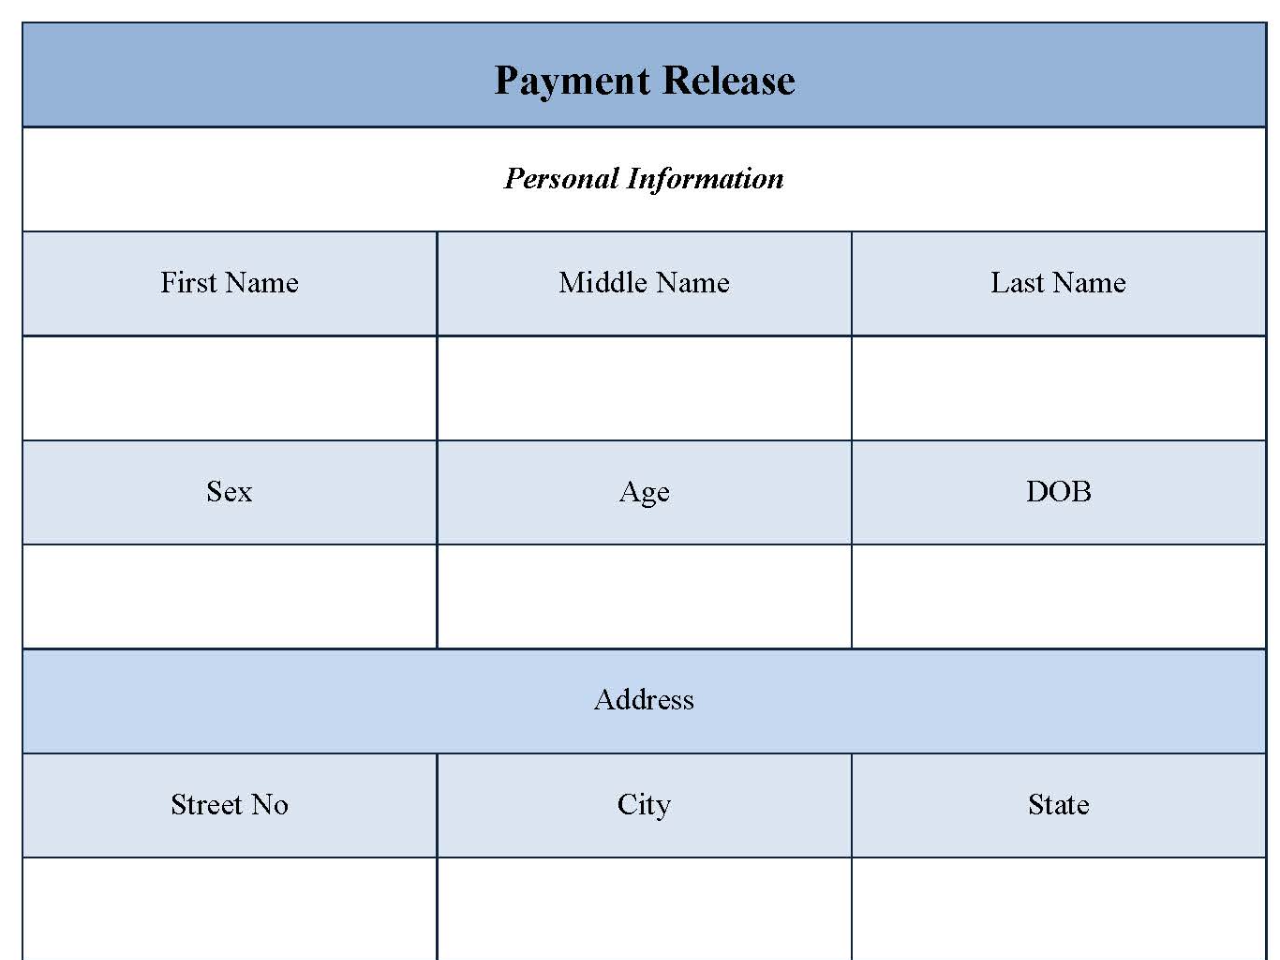 Payment Release Form